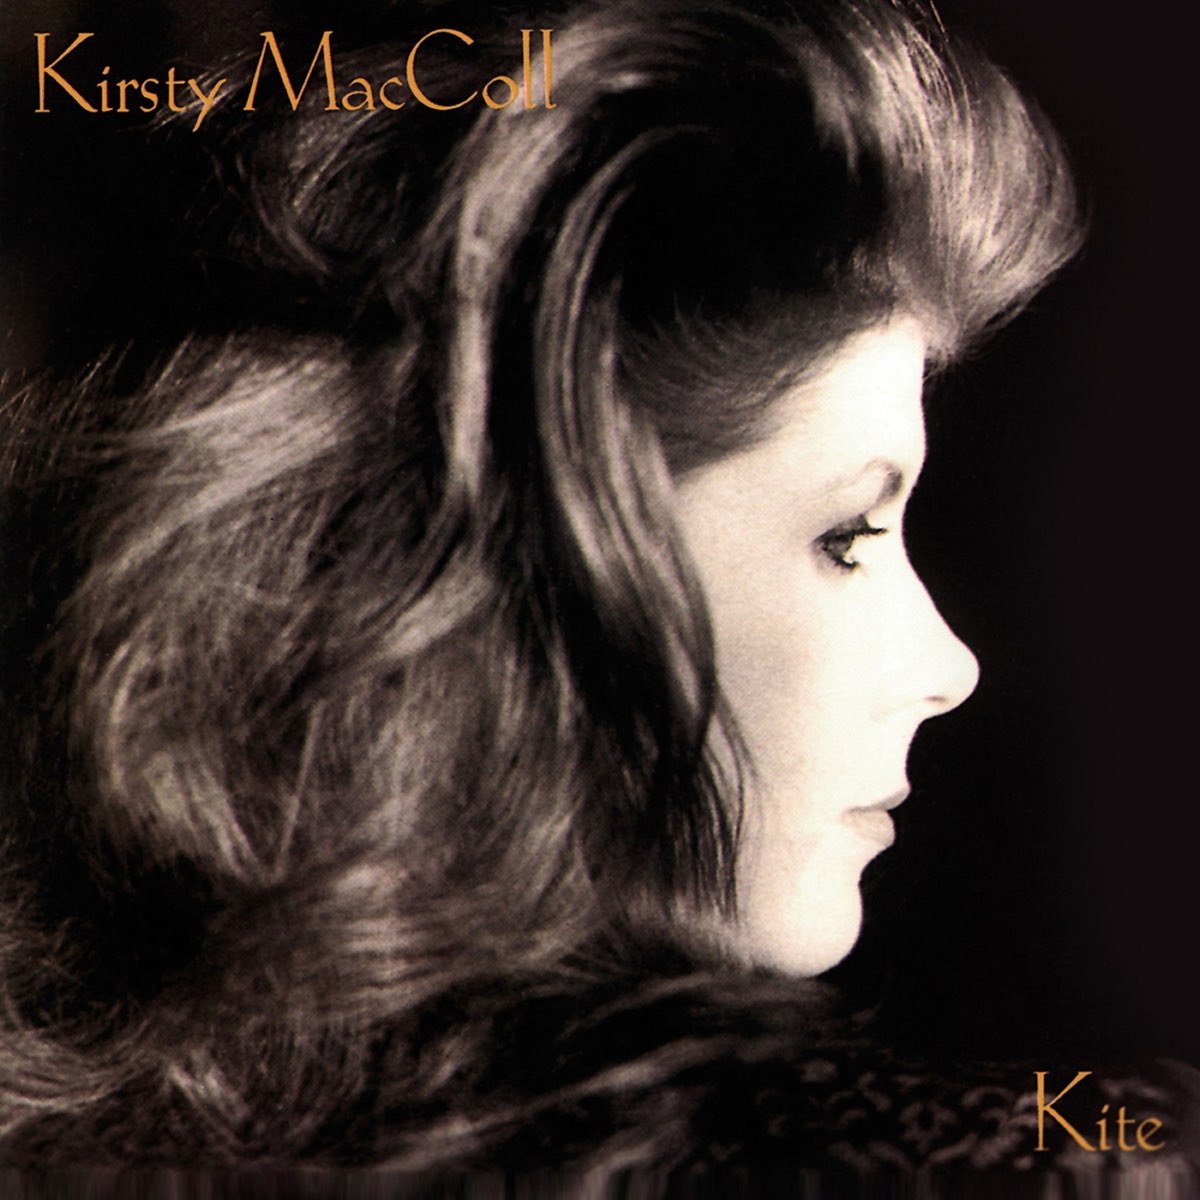 35 years ago today, #KirstyMacColl released “Kite.” @Johnny_Marr! @davidgilmour! @pinopalladino__! Plus, a cover of the greatest rock ’n’ roll song of all time!